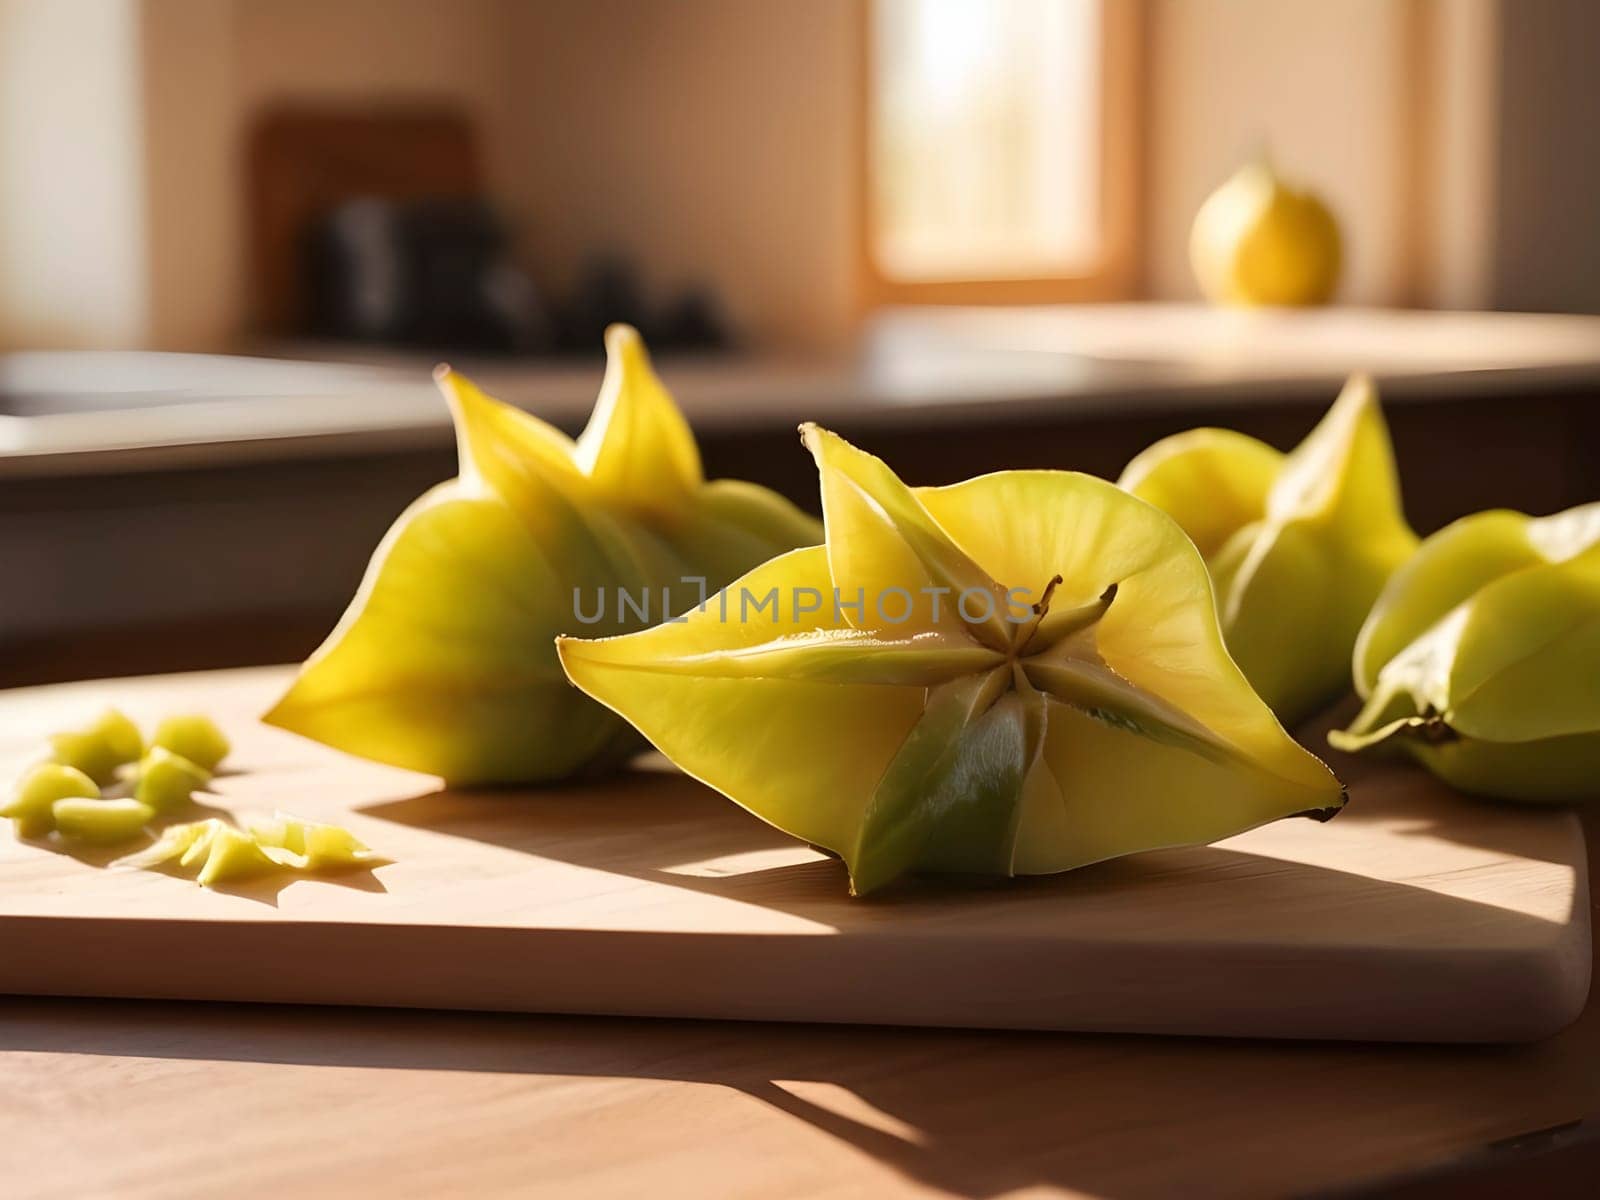 Golden Hour Delight: Star Fruit on a Wooden Board in a Sunlit Kitchen Scene by mailos